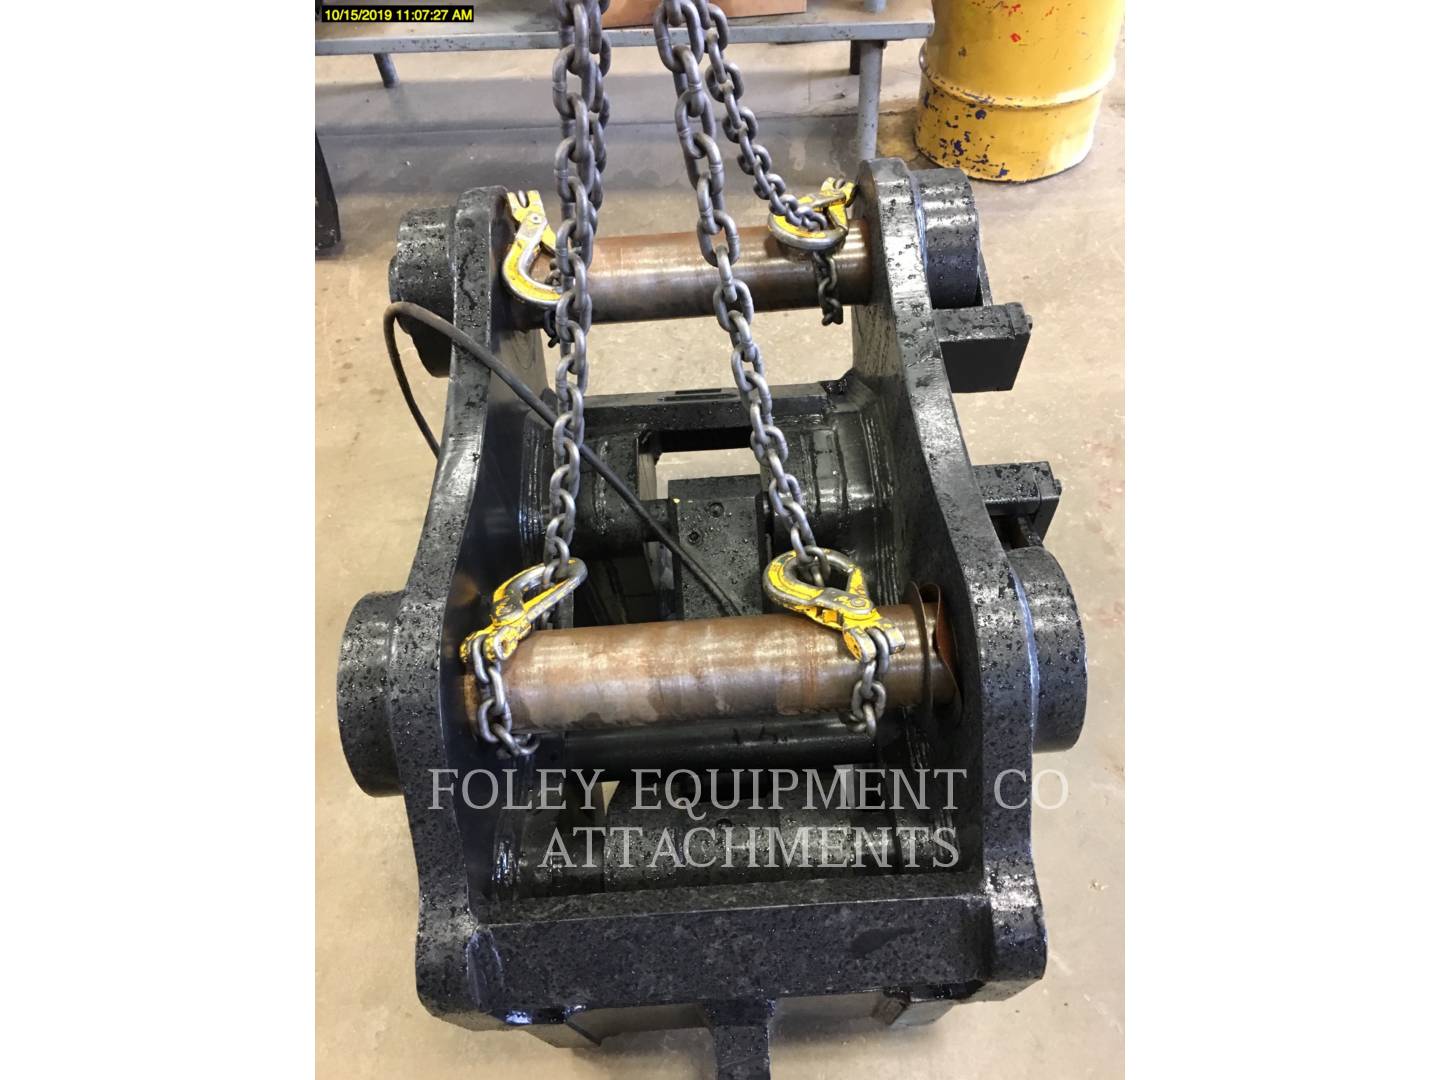 Used Equipment Attachments For Sale - Foley Equipment Mobile